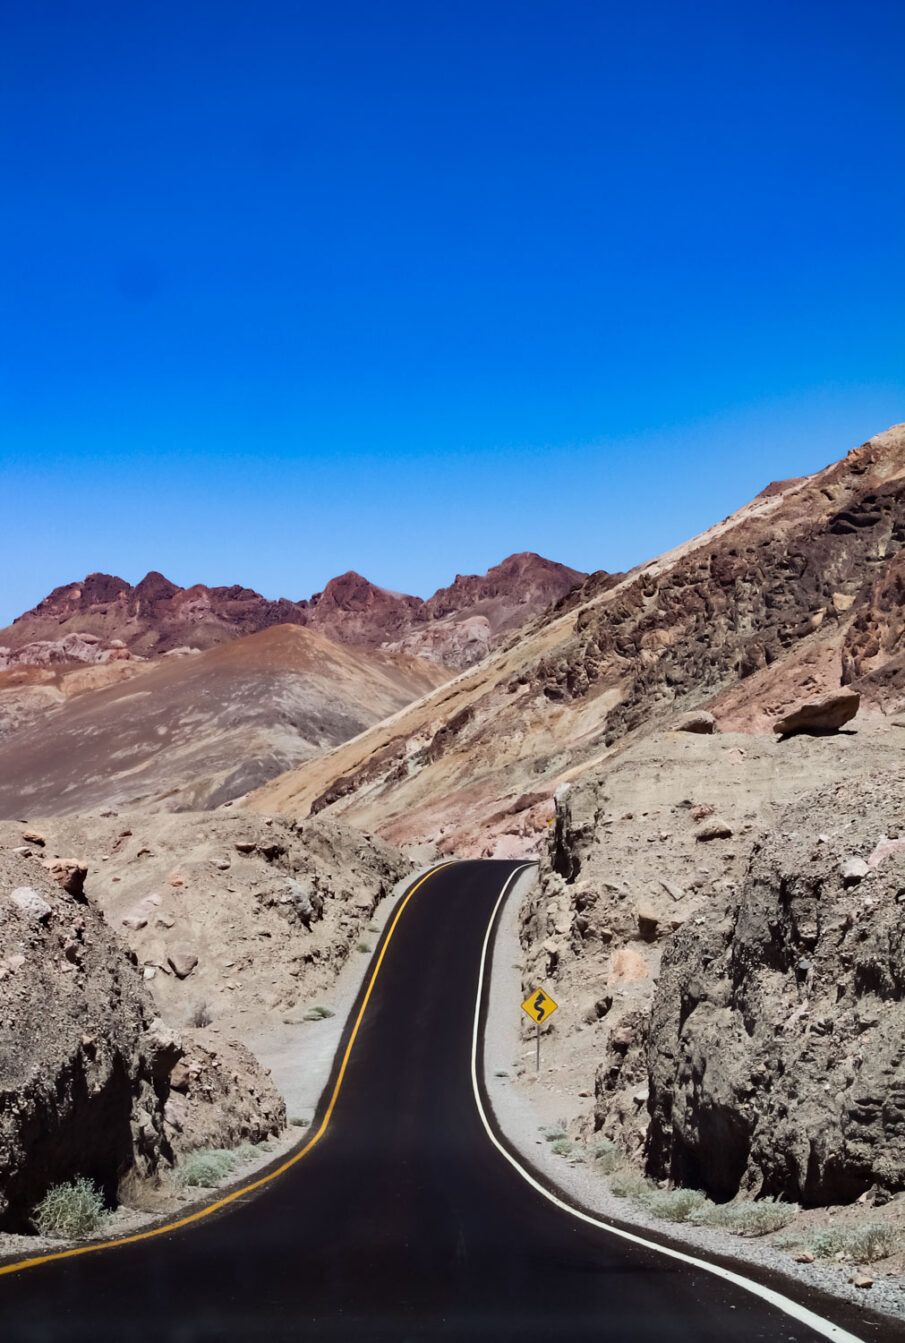 The Artist's Drive road weaves through mountainous terrain in Death Valley National Park